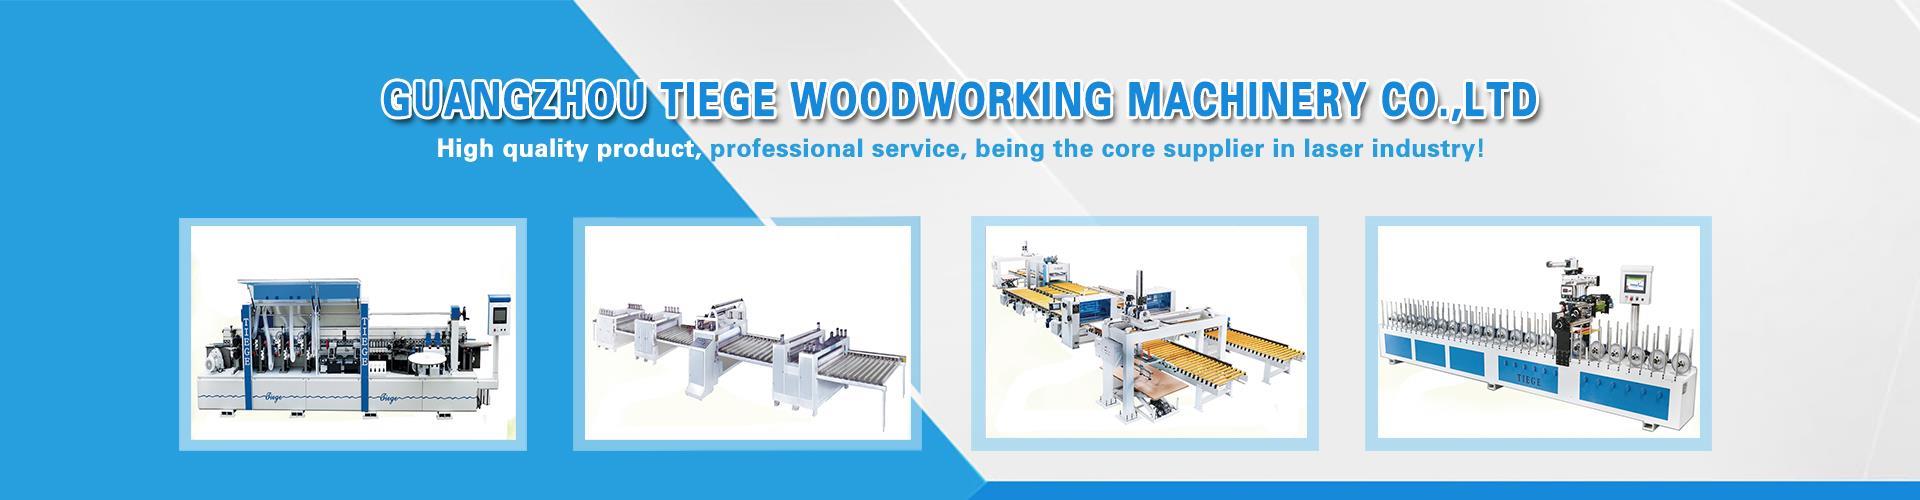 What are the industries of woodworking machinery